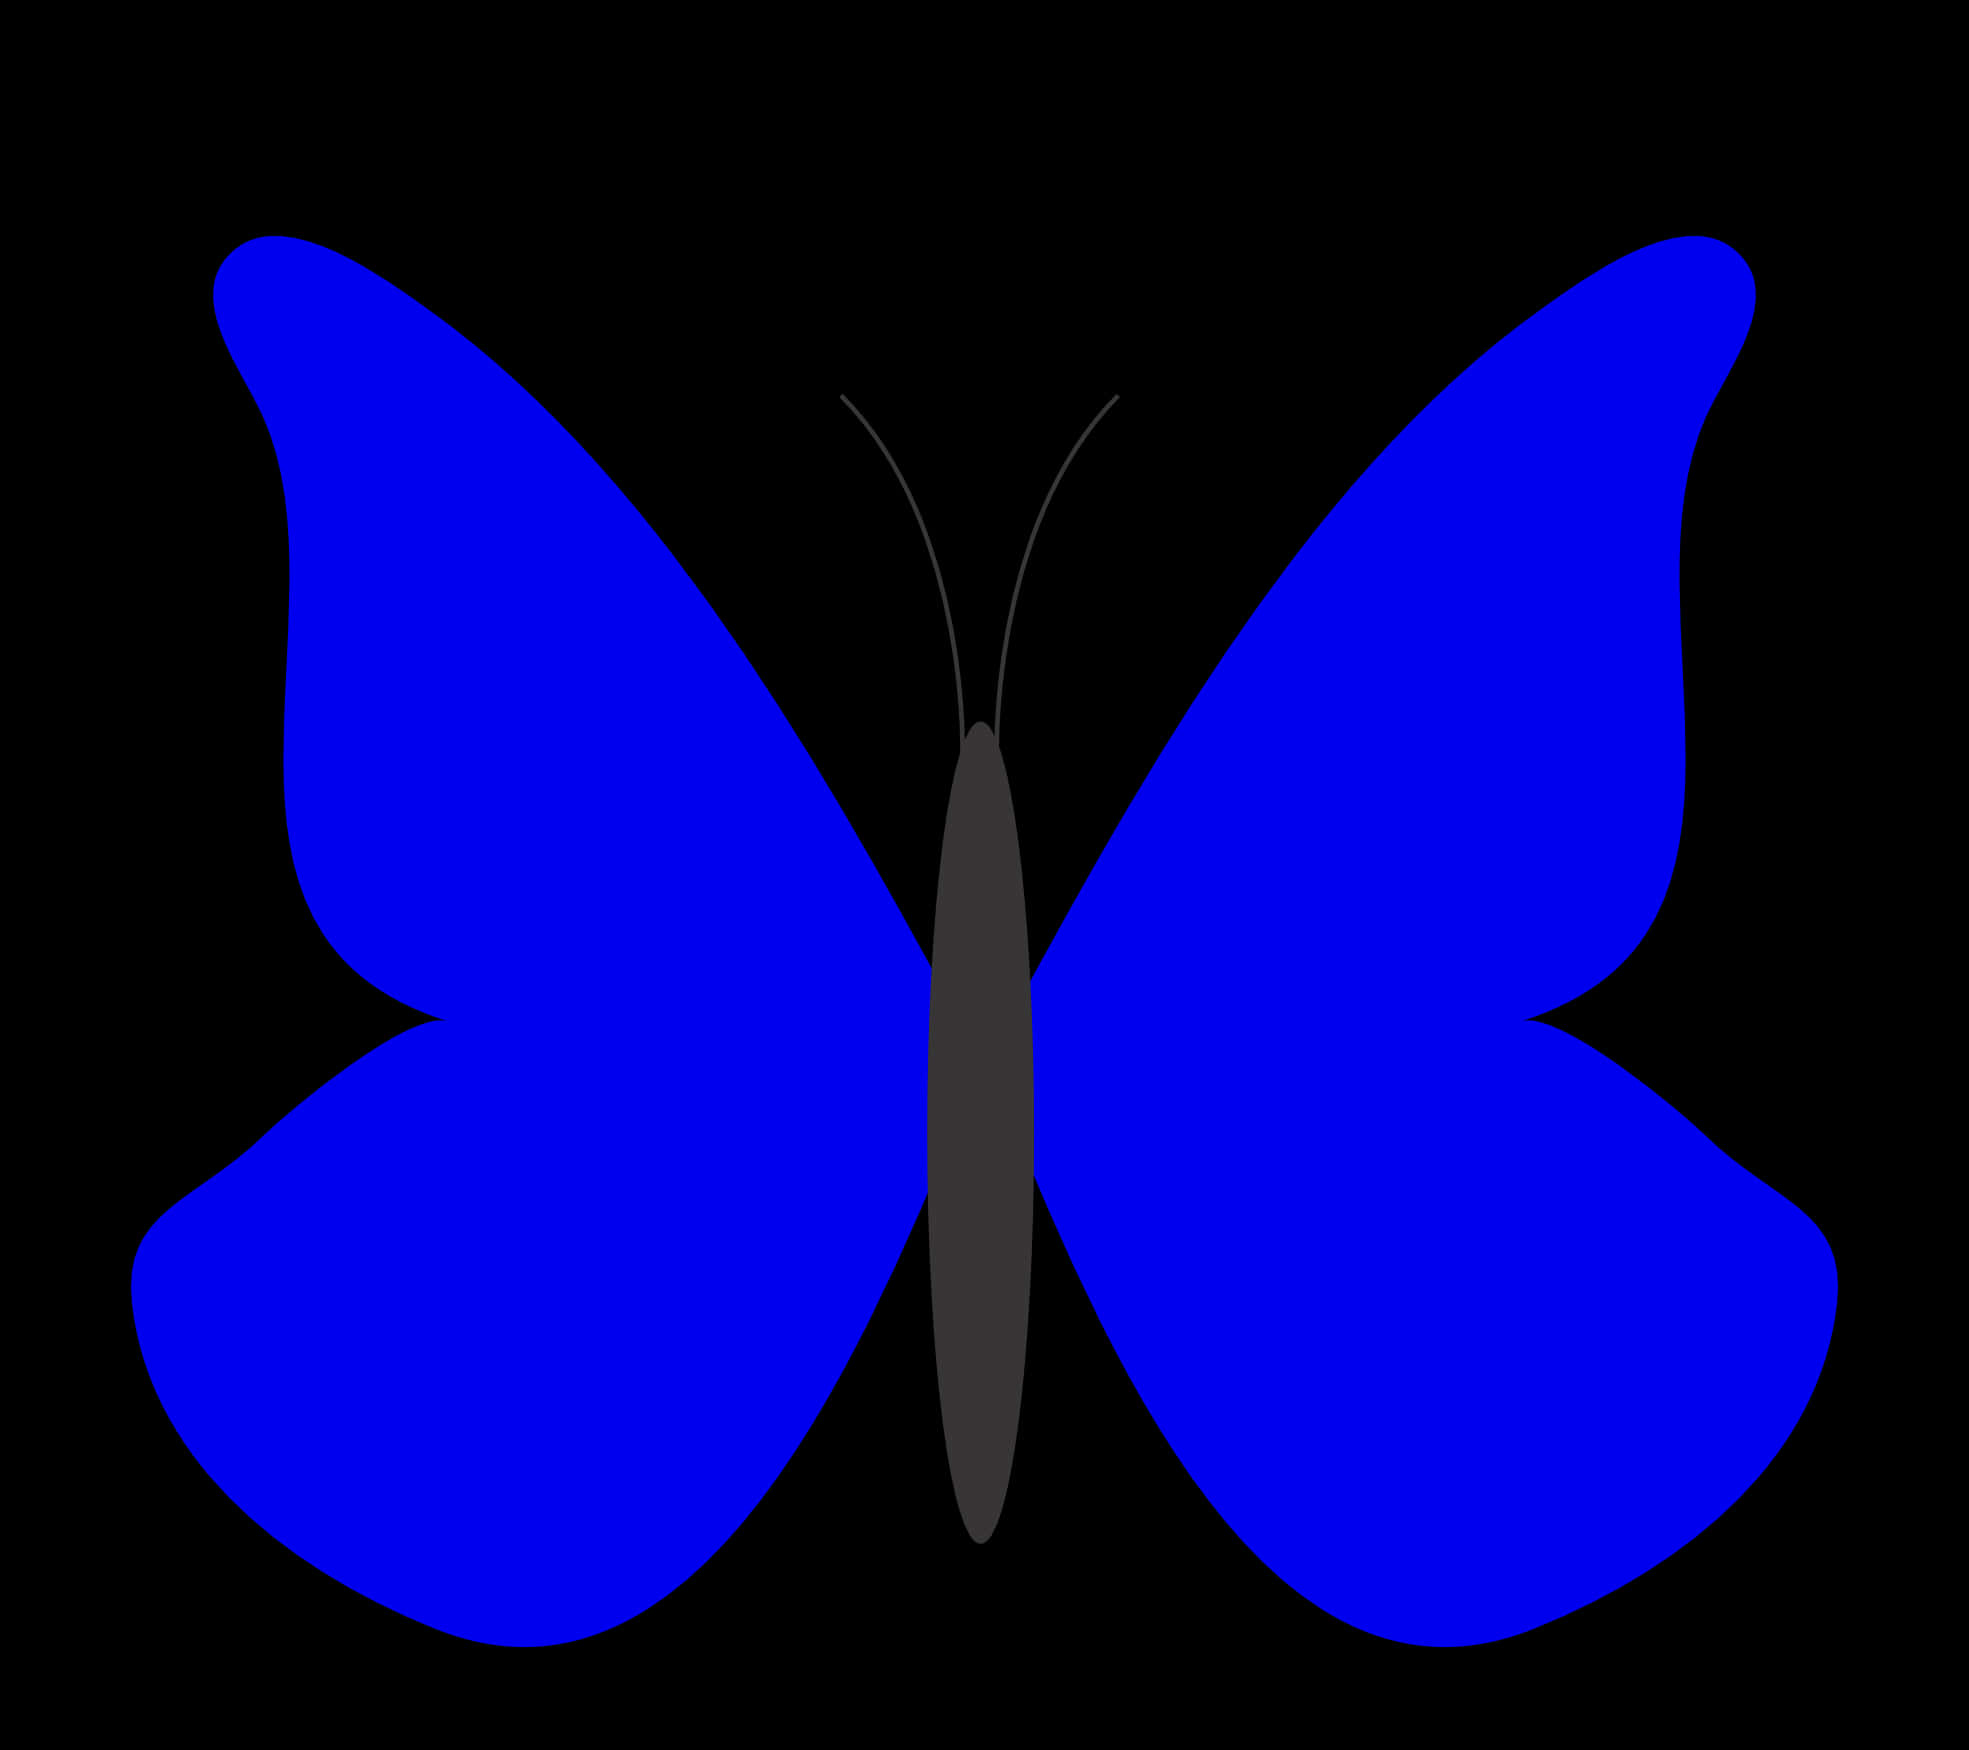 Blue Silhouette Butterflyon Black Background.png